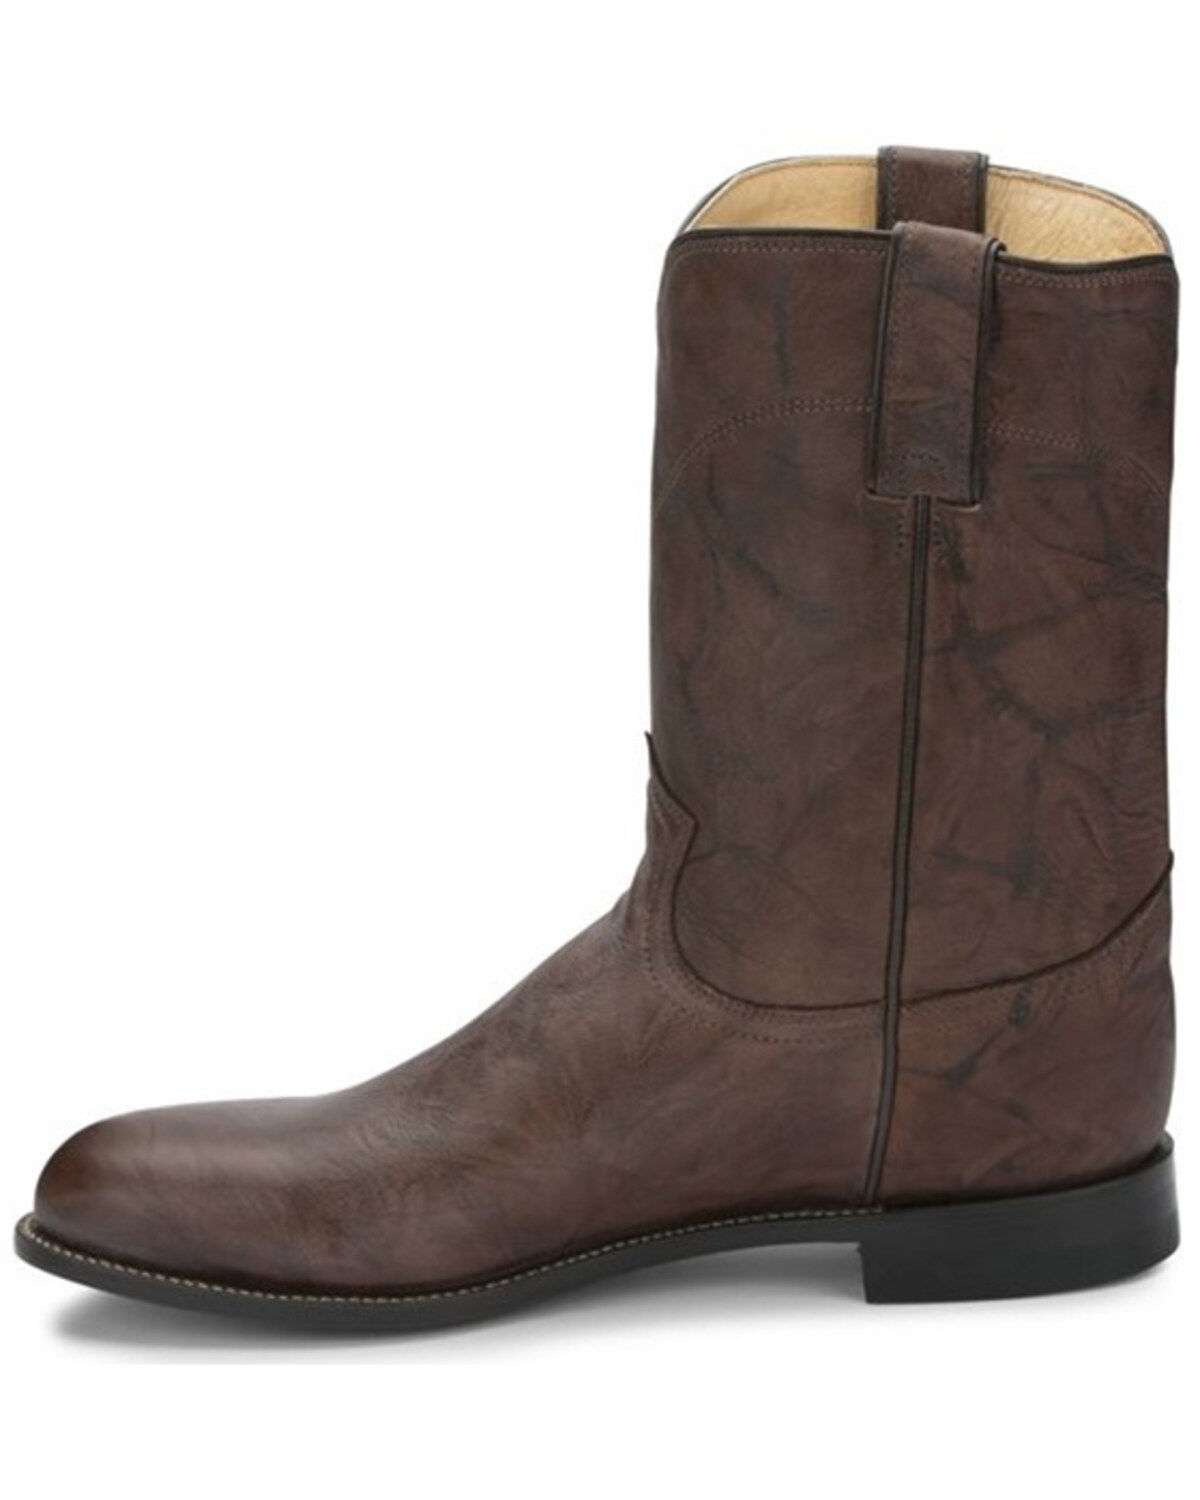 justin boots men's ropers equestrian boot